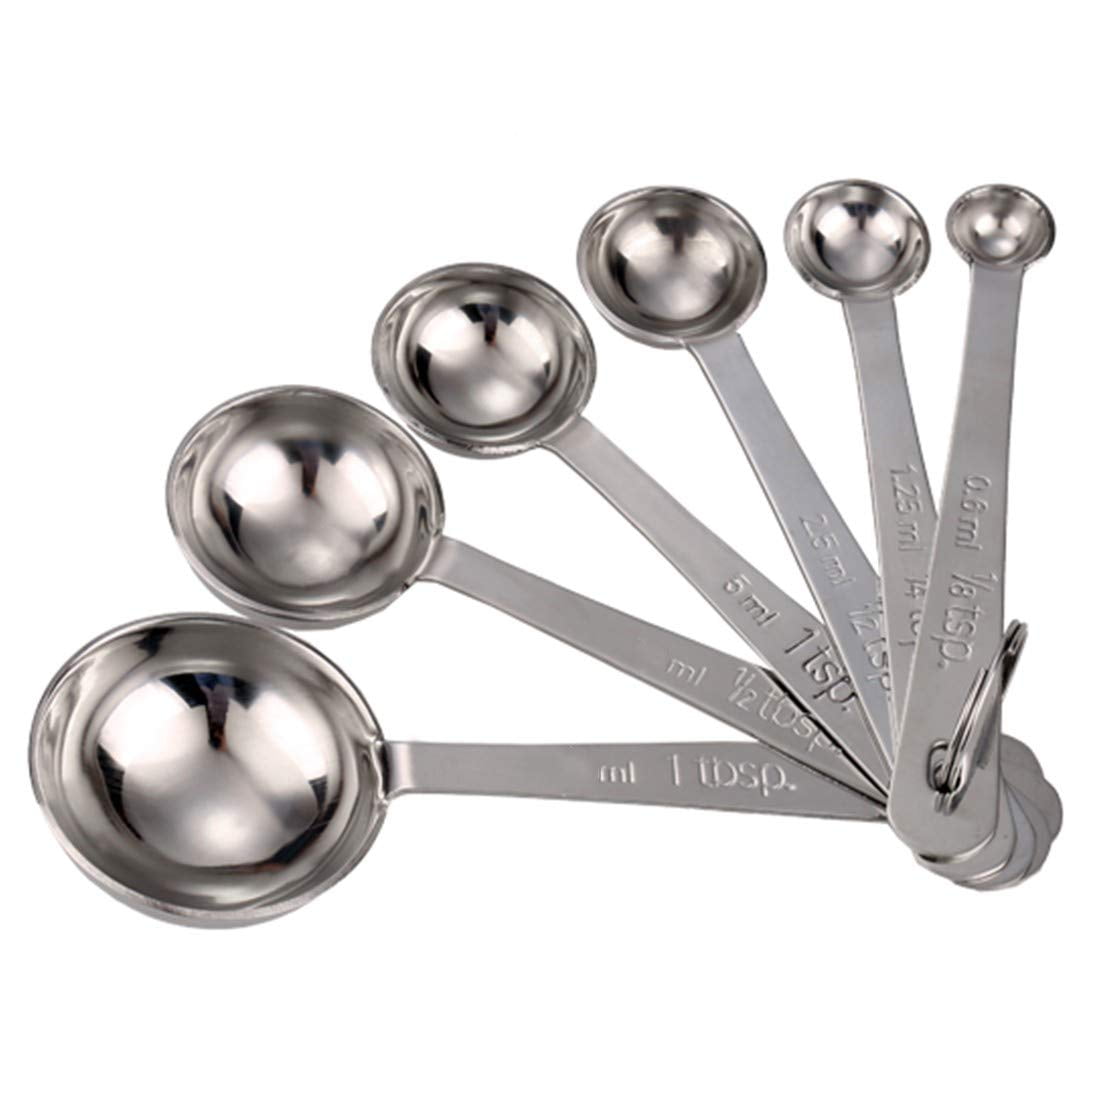 Dependable Industries Stainless Steel 18/8 Metal Measuring Spoons for Dry  or Liquid Ingredients Commercial Grade Kitchen Cooking Baking Spice Measuring  Spoon Easy to Read Measurements 